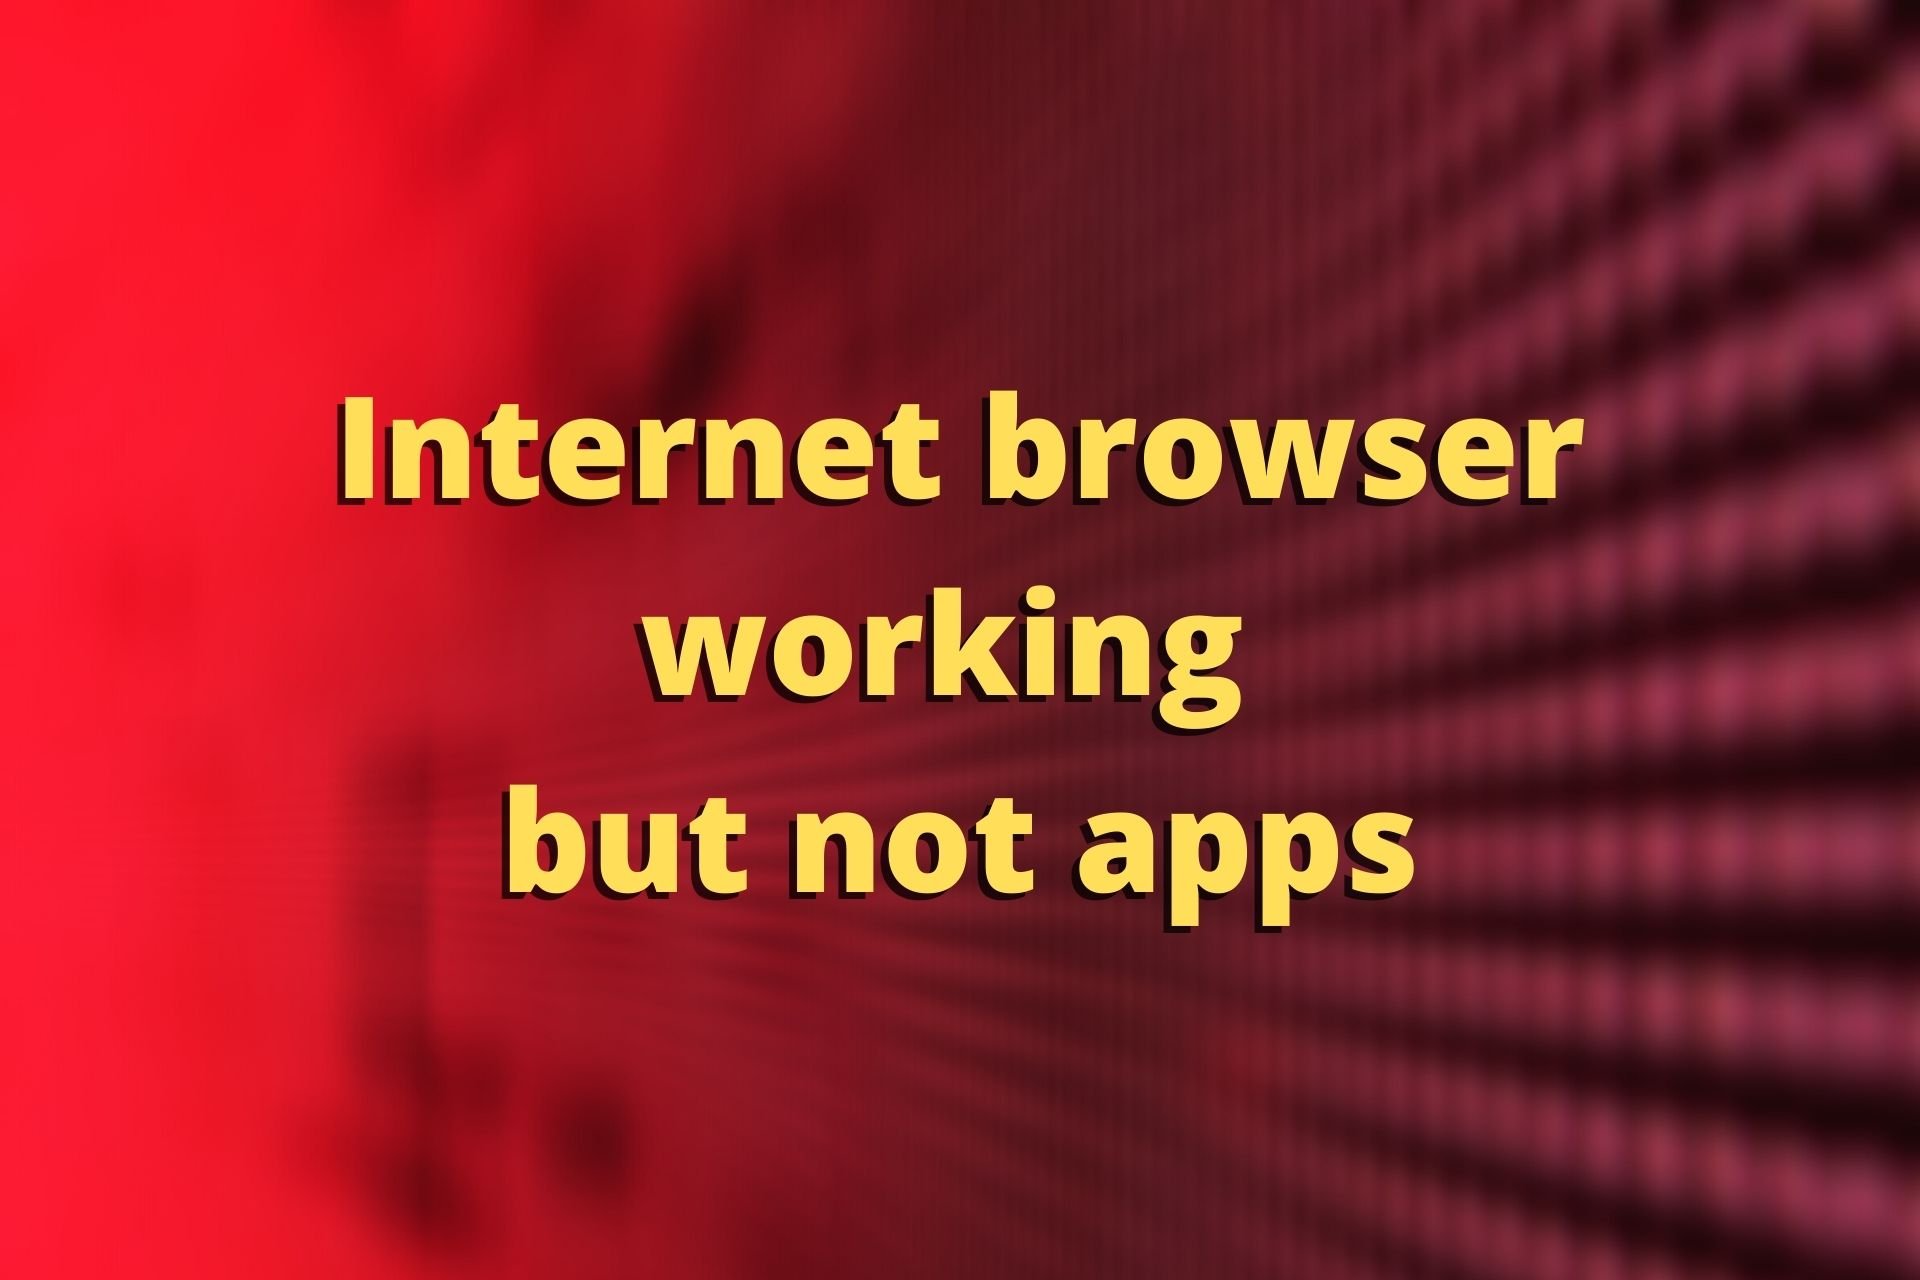 Internet browser working but not apps